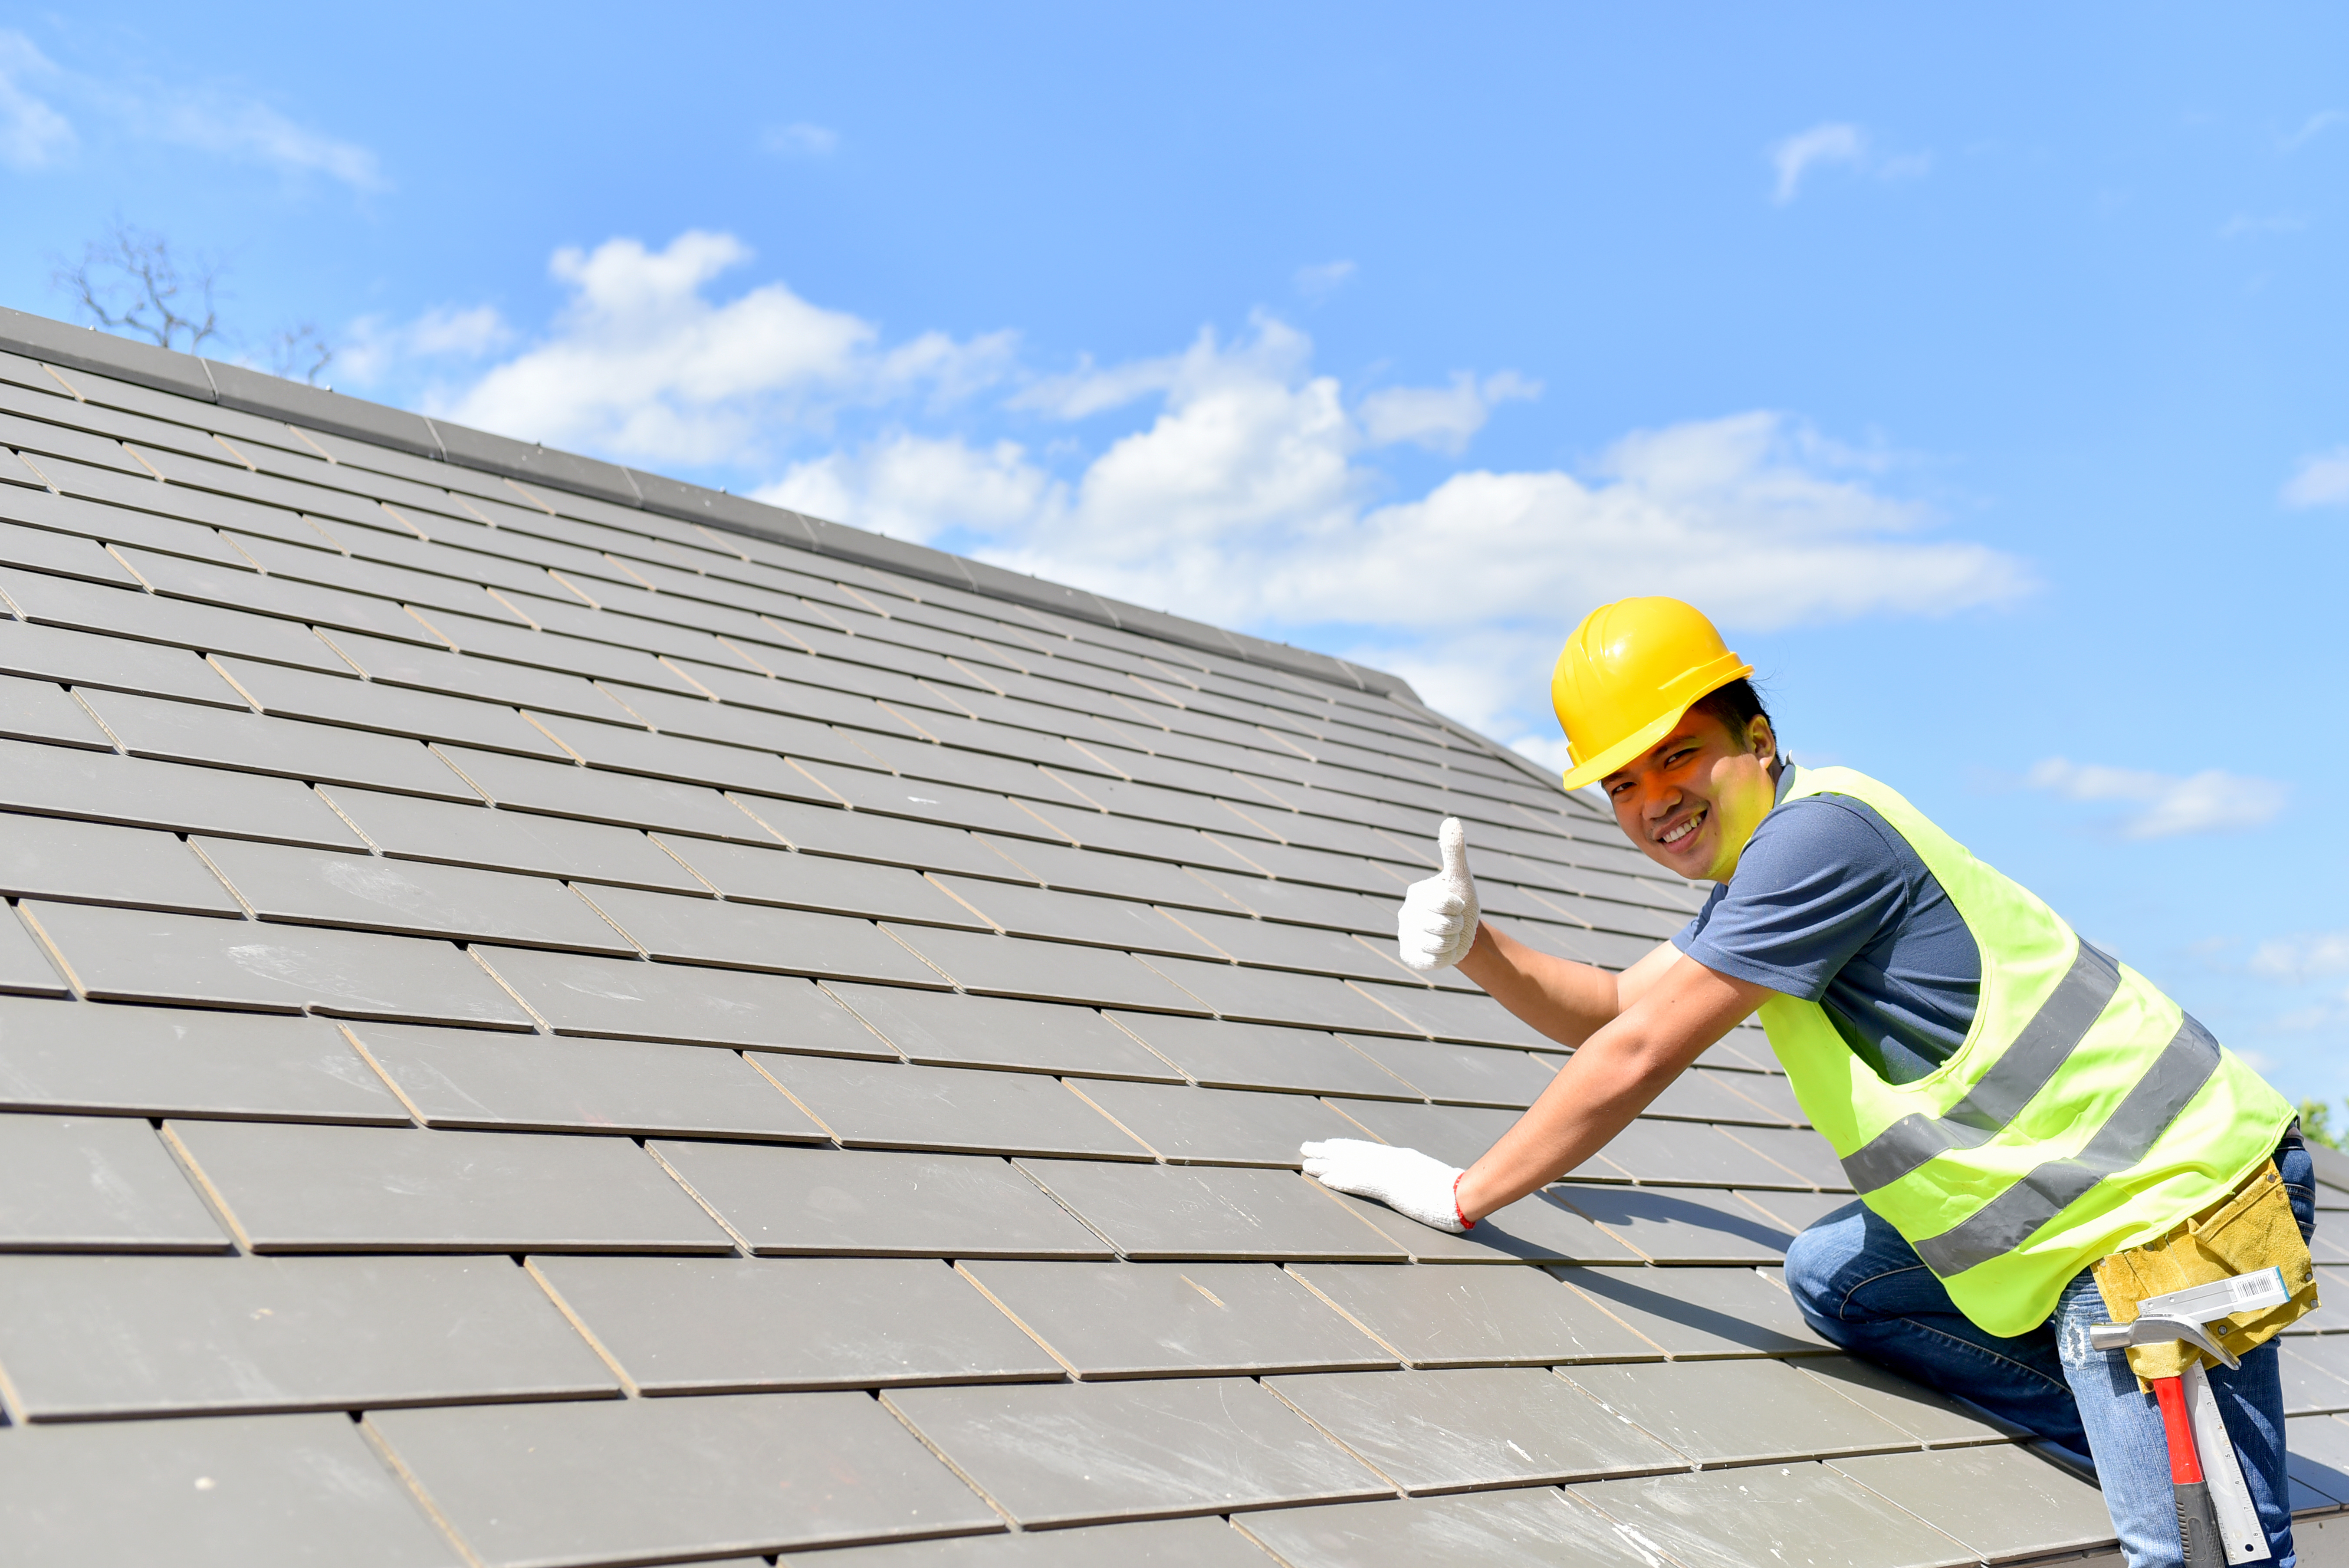 A contractor works on a roof with proper personal protection equipment